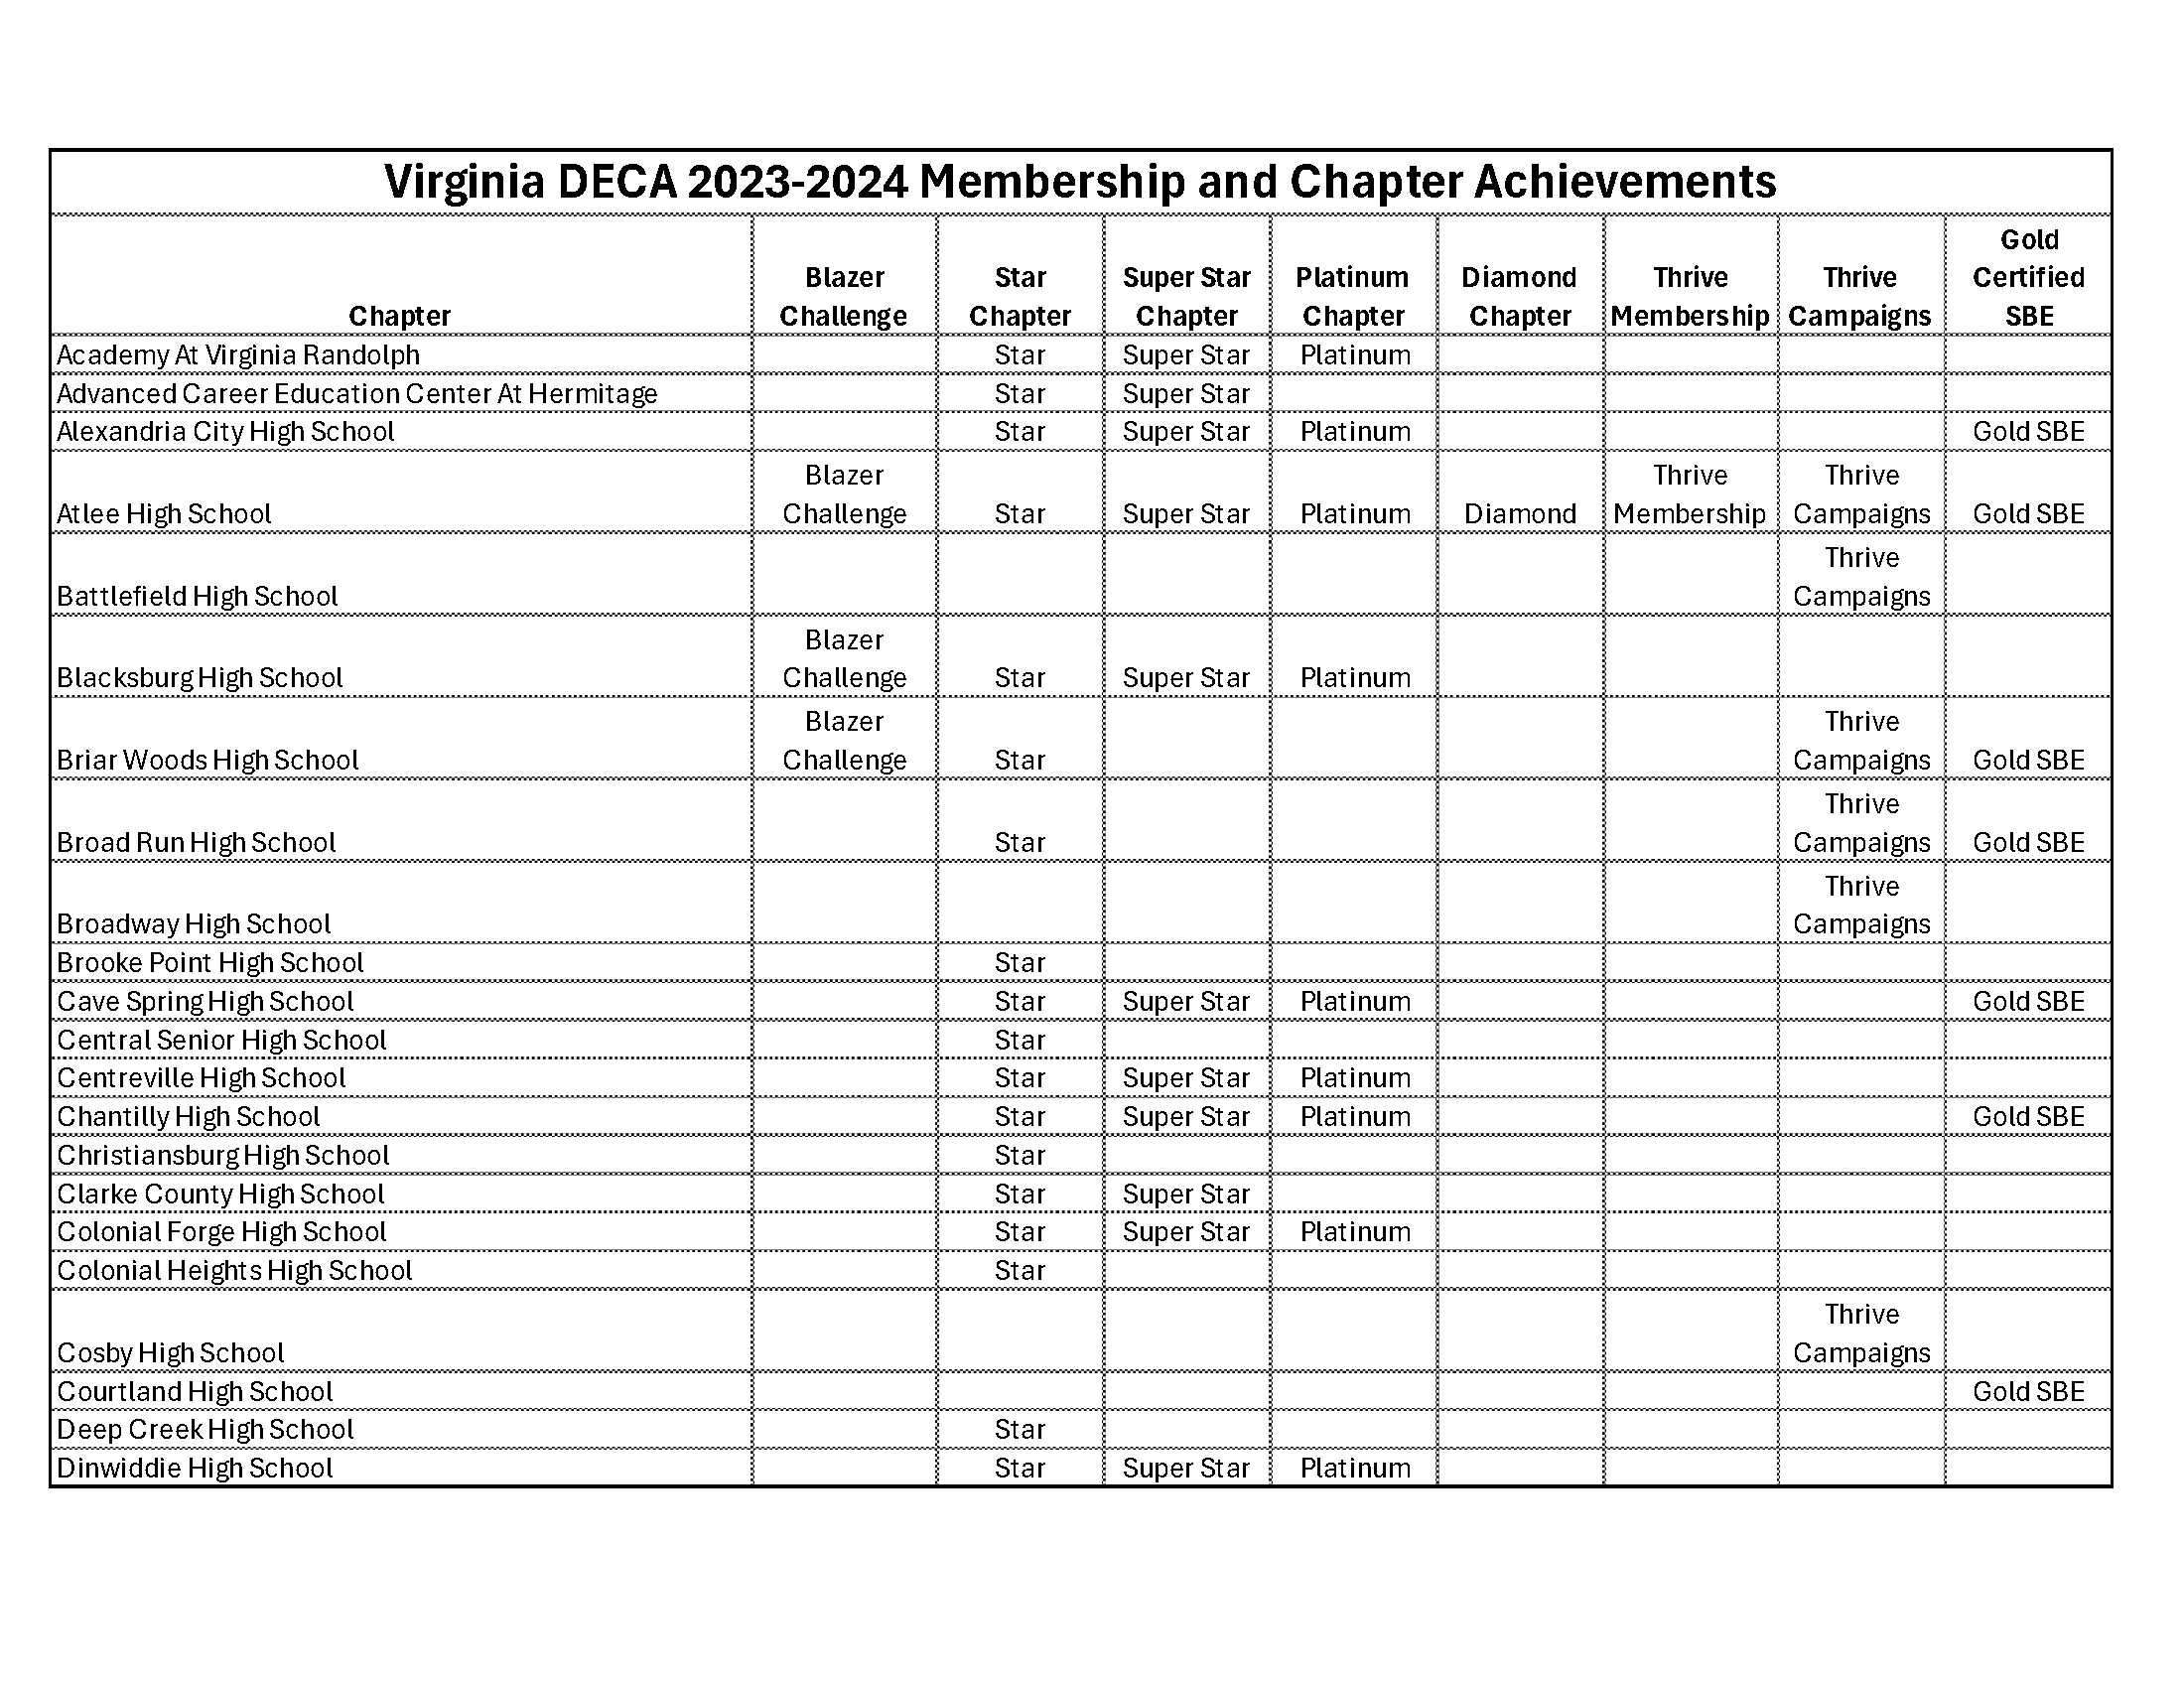 2023-2024 VA DECA Chapters earning recognition for membership and chapter efforts.